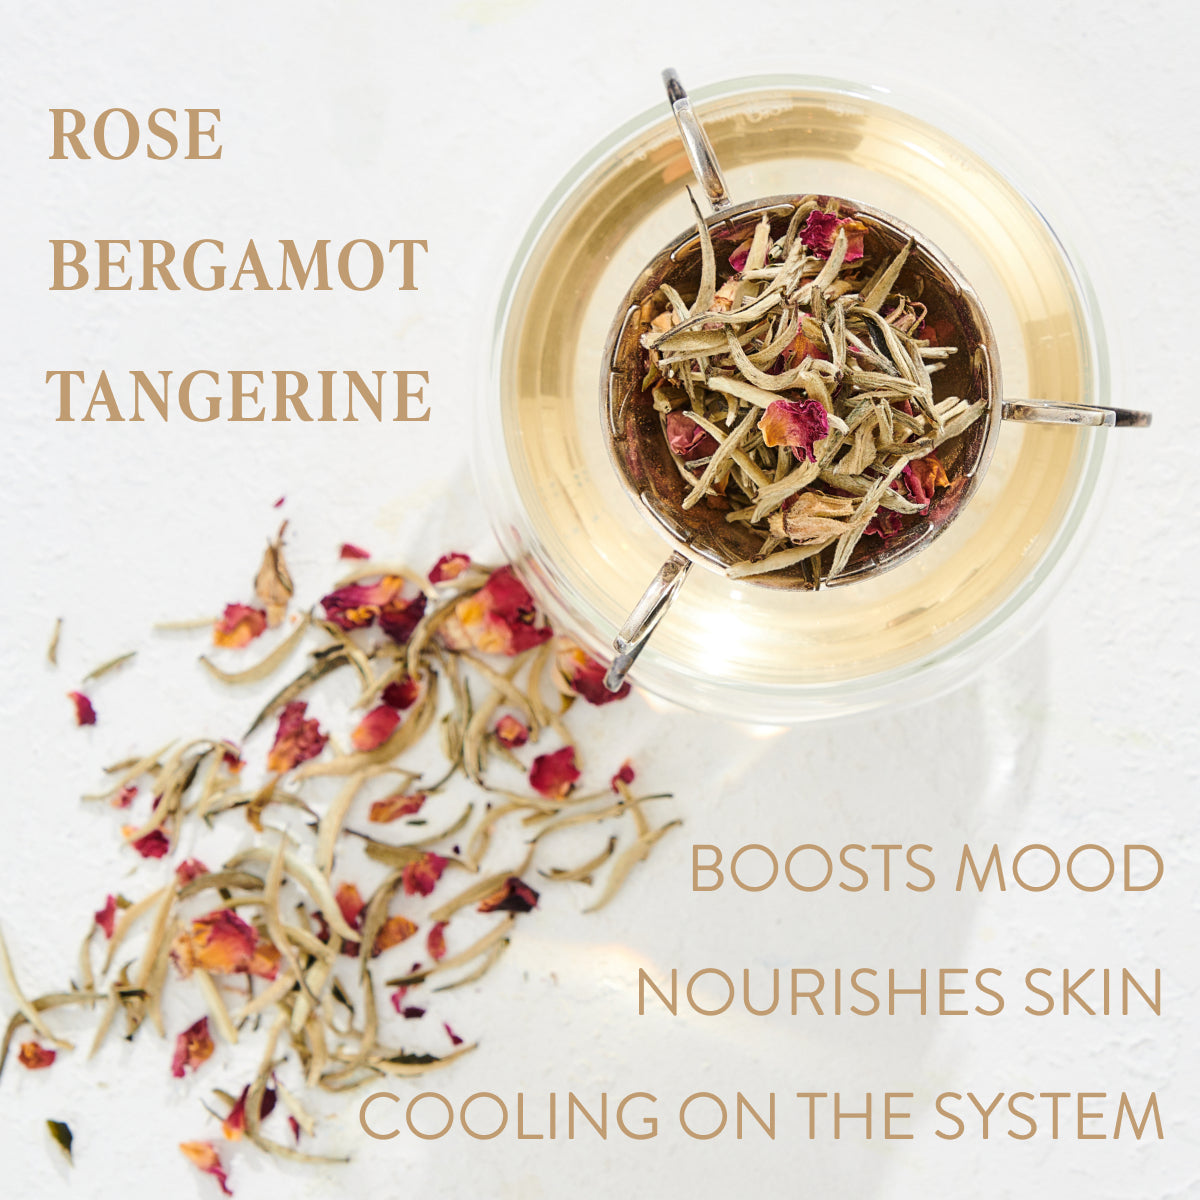 A glass teapot filled with hot water and dried tea leaves, including rose petals, is displayed alongside loose leaf tea on a light surface. Text on the image reads: "Rose, Bergamot, Tangerine. Boosts Mood, Nourishes Skin, Cooling on the System." Indulge in this organic Magic Hour Harmonize White Tea experience.